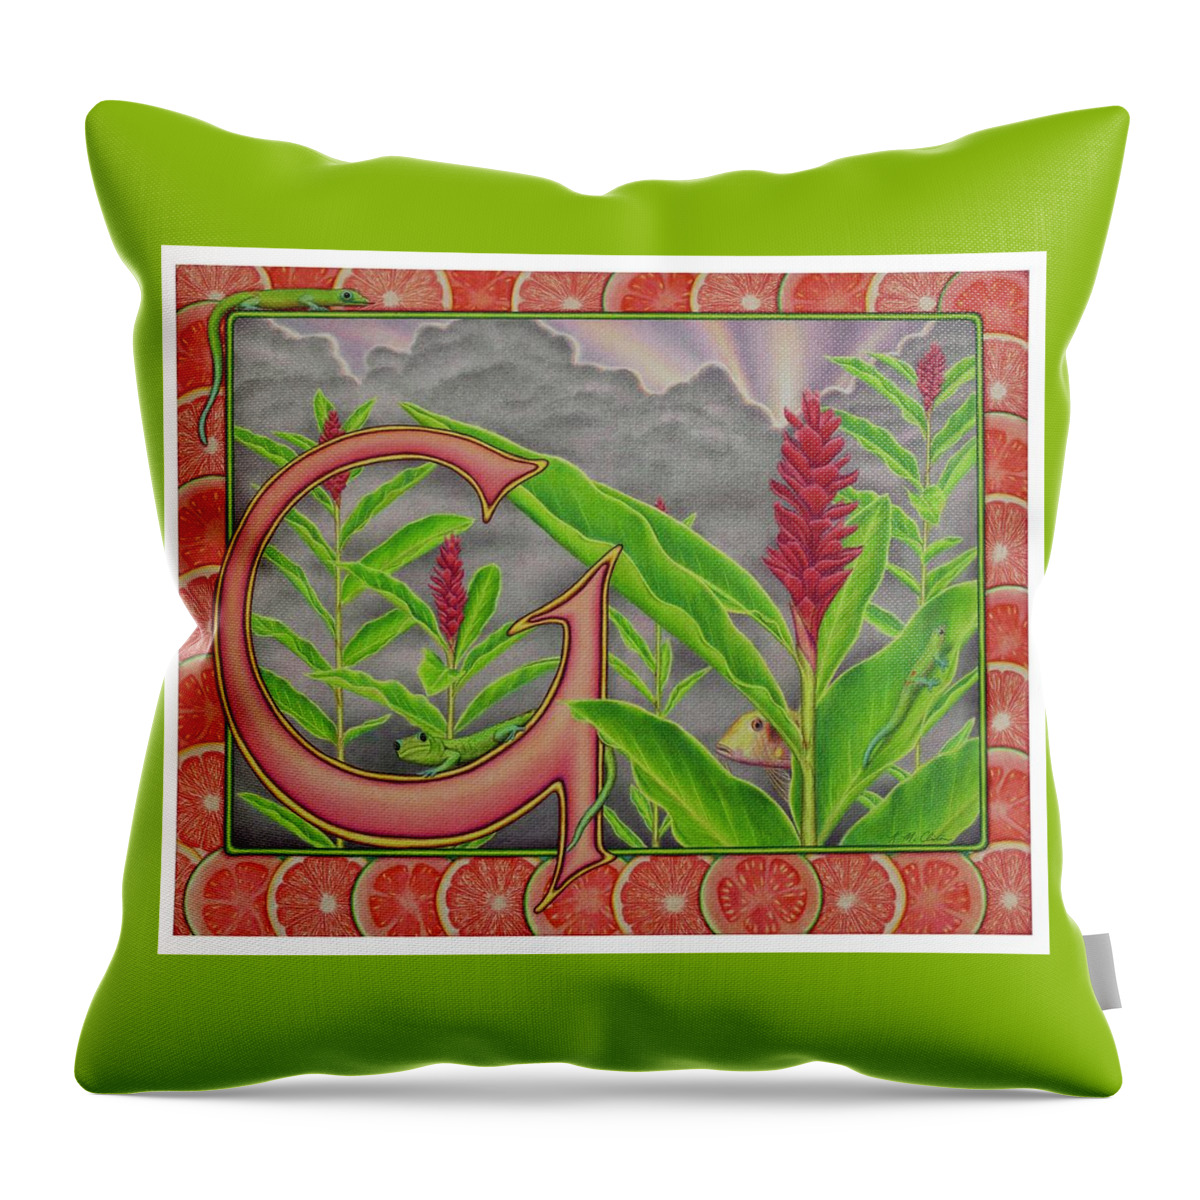 Kim Mcclinton Throw Pillow featuring the drawing G is for Gecko by Kim McClinton